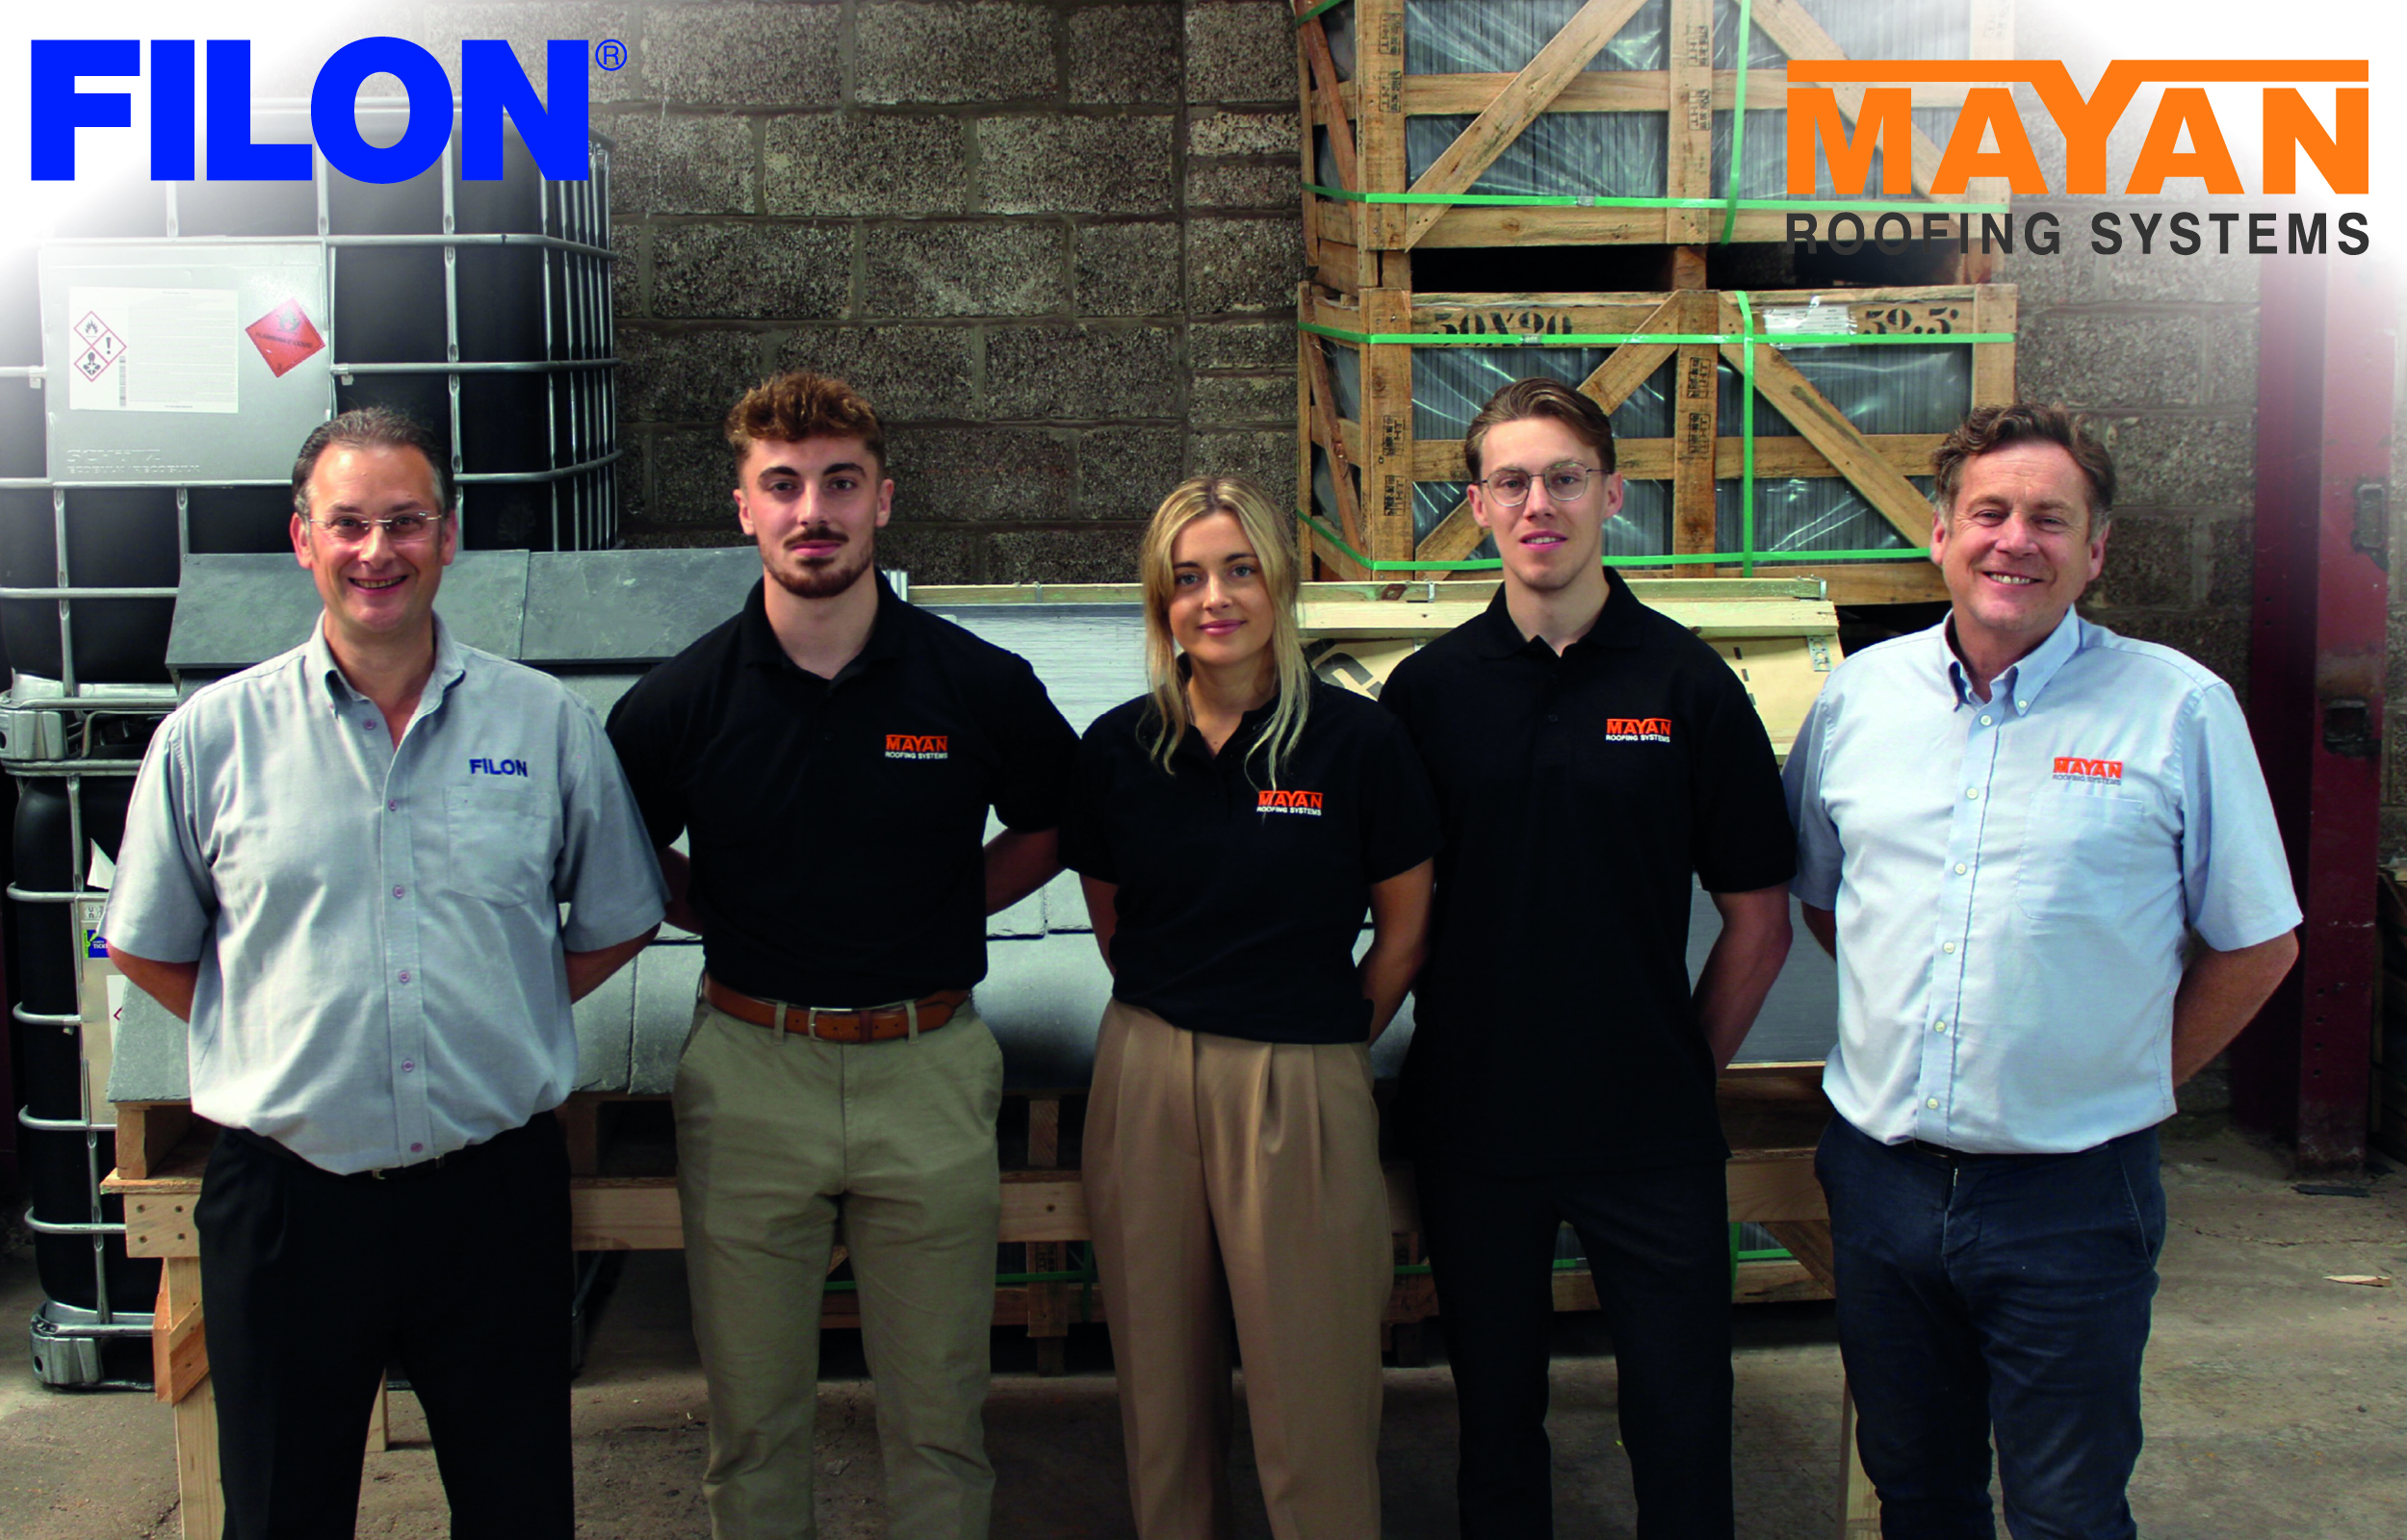 Mayan Roofing Systems Ltd receives Investment from Filon Products Ltd to Accelerate Growth